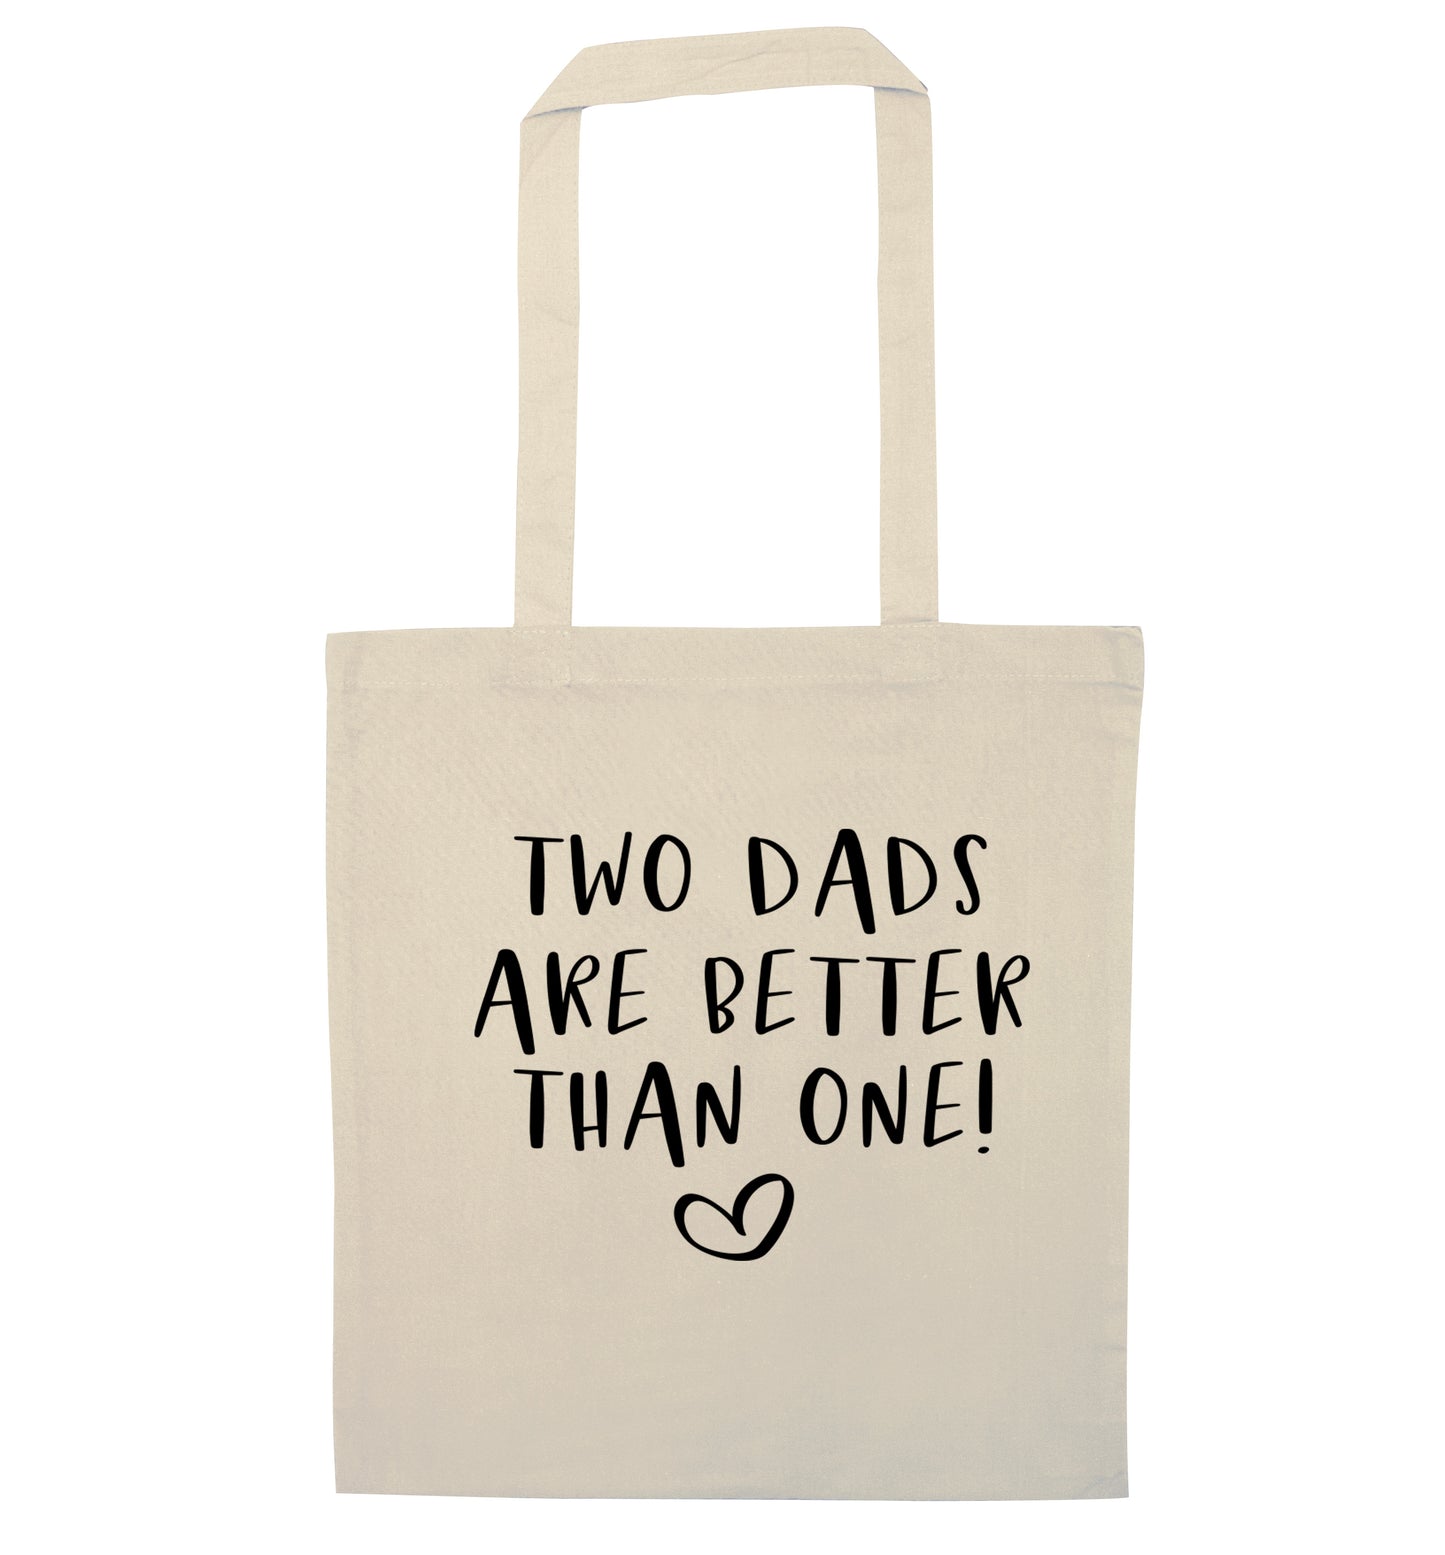 Two dads are better than one natural tote bag